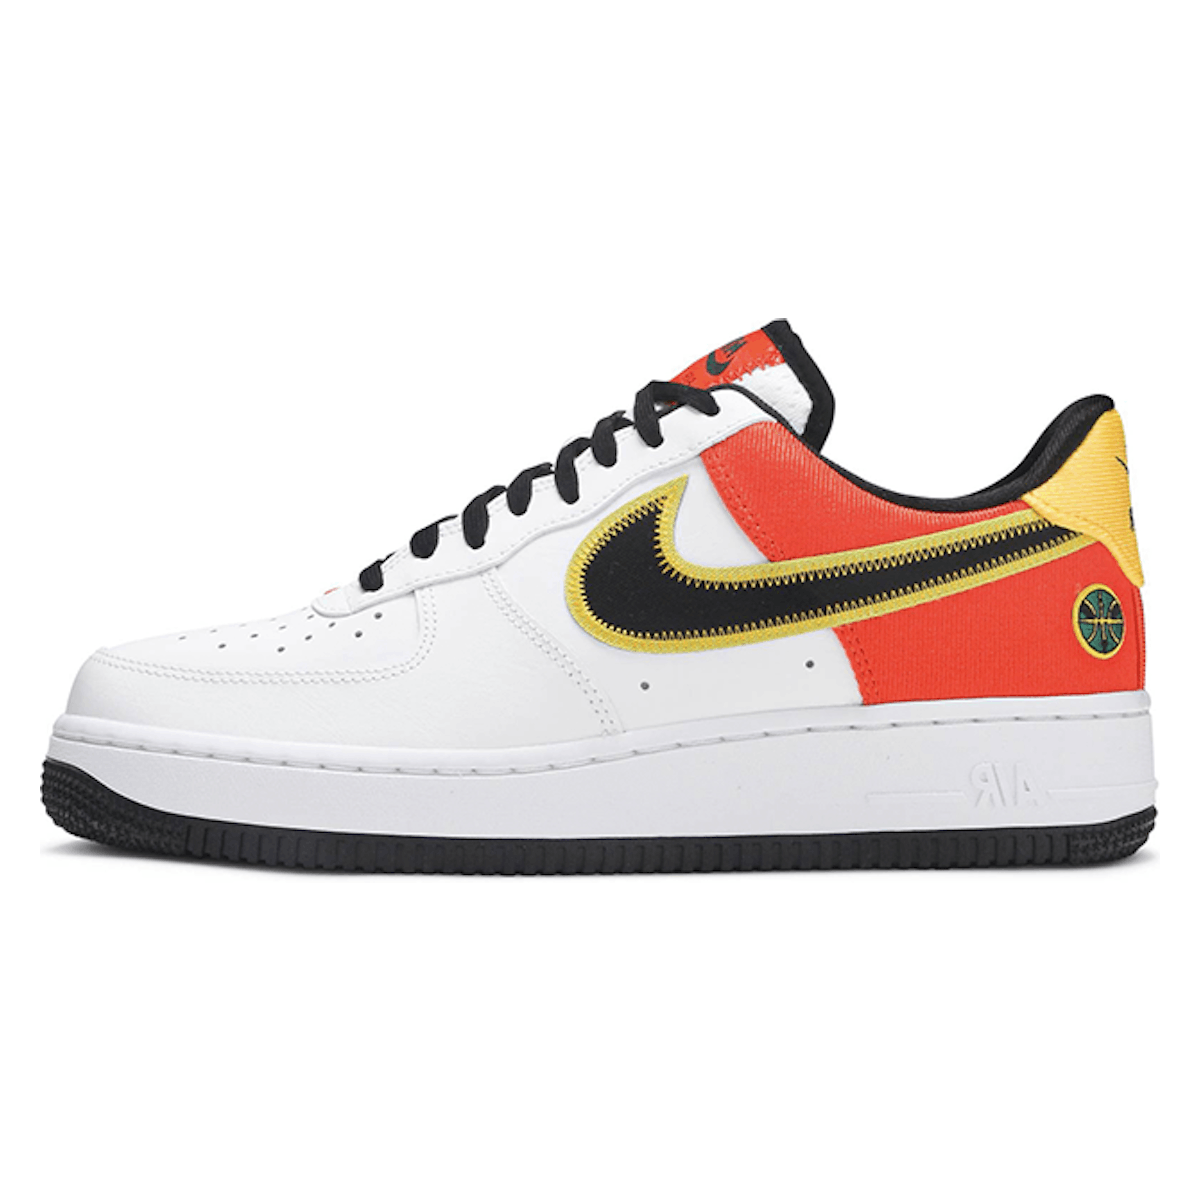 Nike Air Force 1 Low "Rayguns"